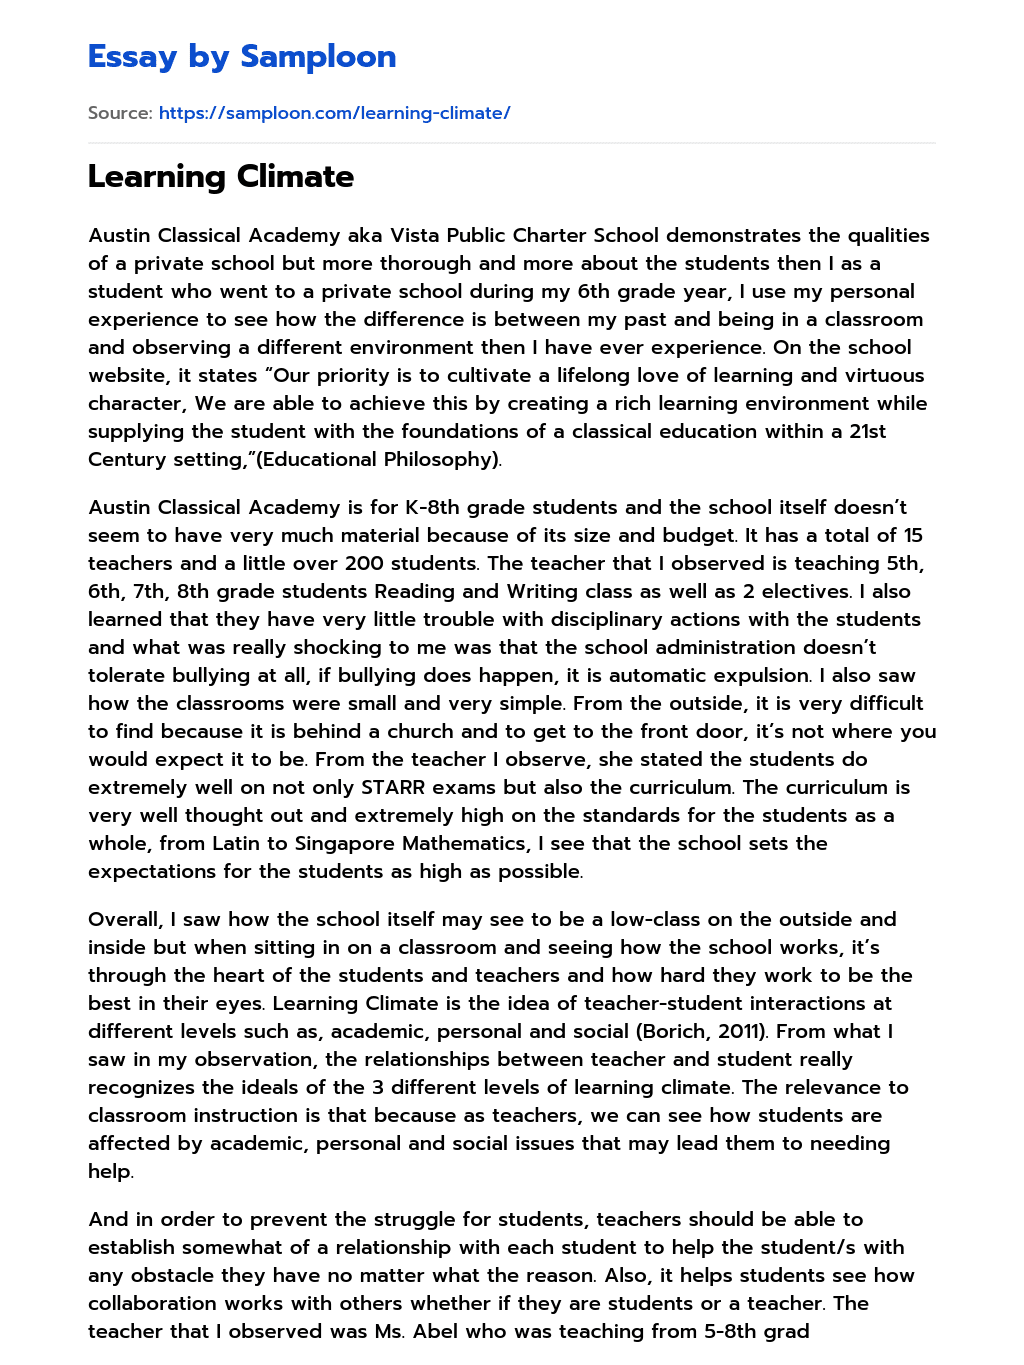 Learning Climate essay